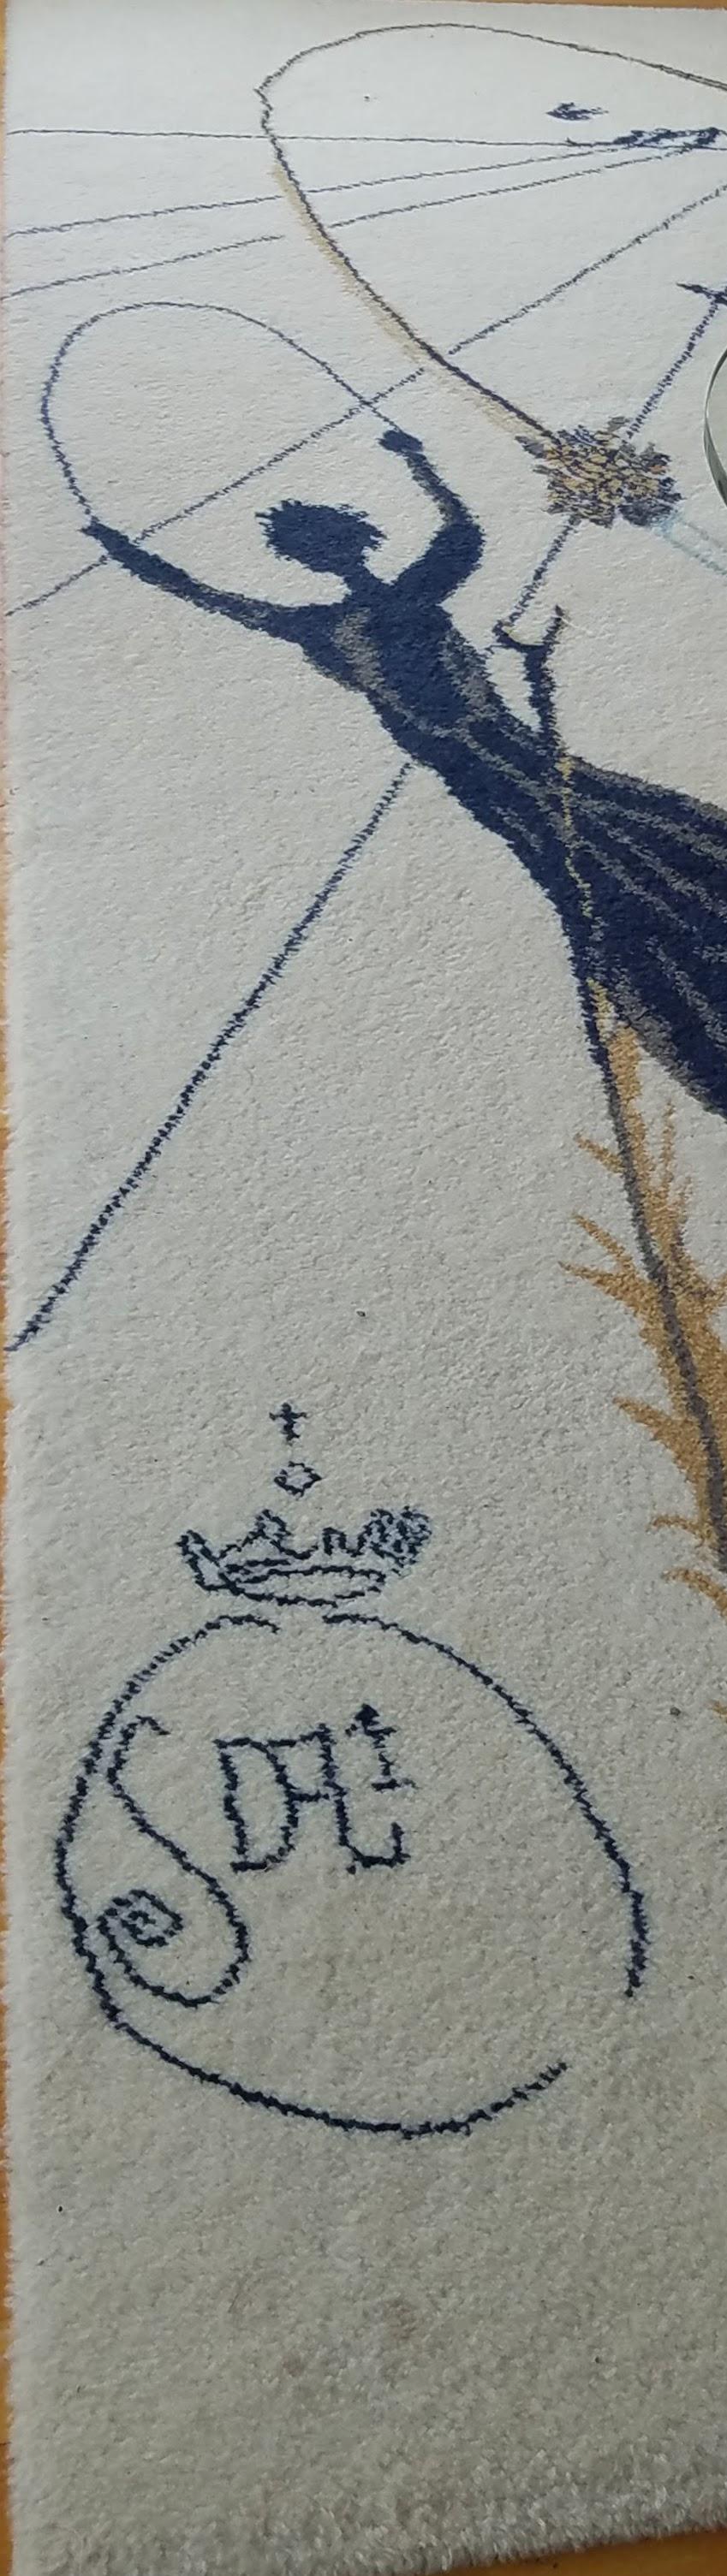 Alice in Wonderland Rug by Salvador Dalí from Ege Axminster A/S, Denmark, 1977 In Good Condition For Sale In Camden, ME